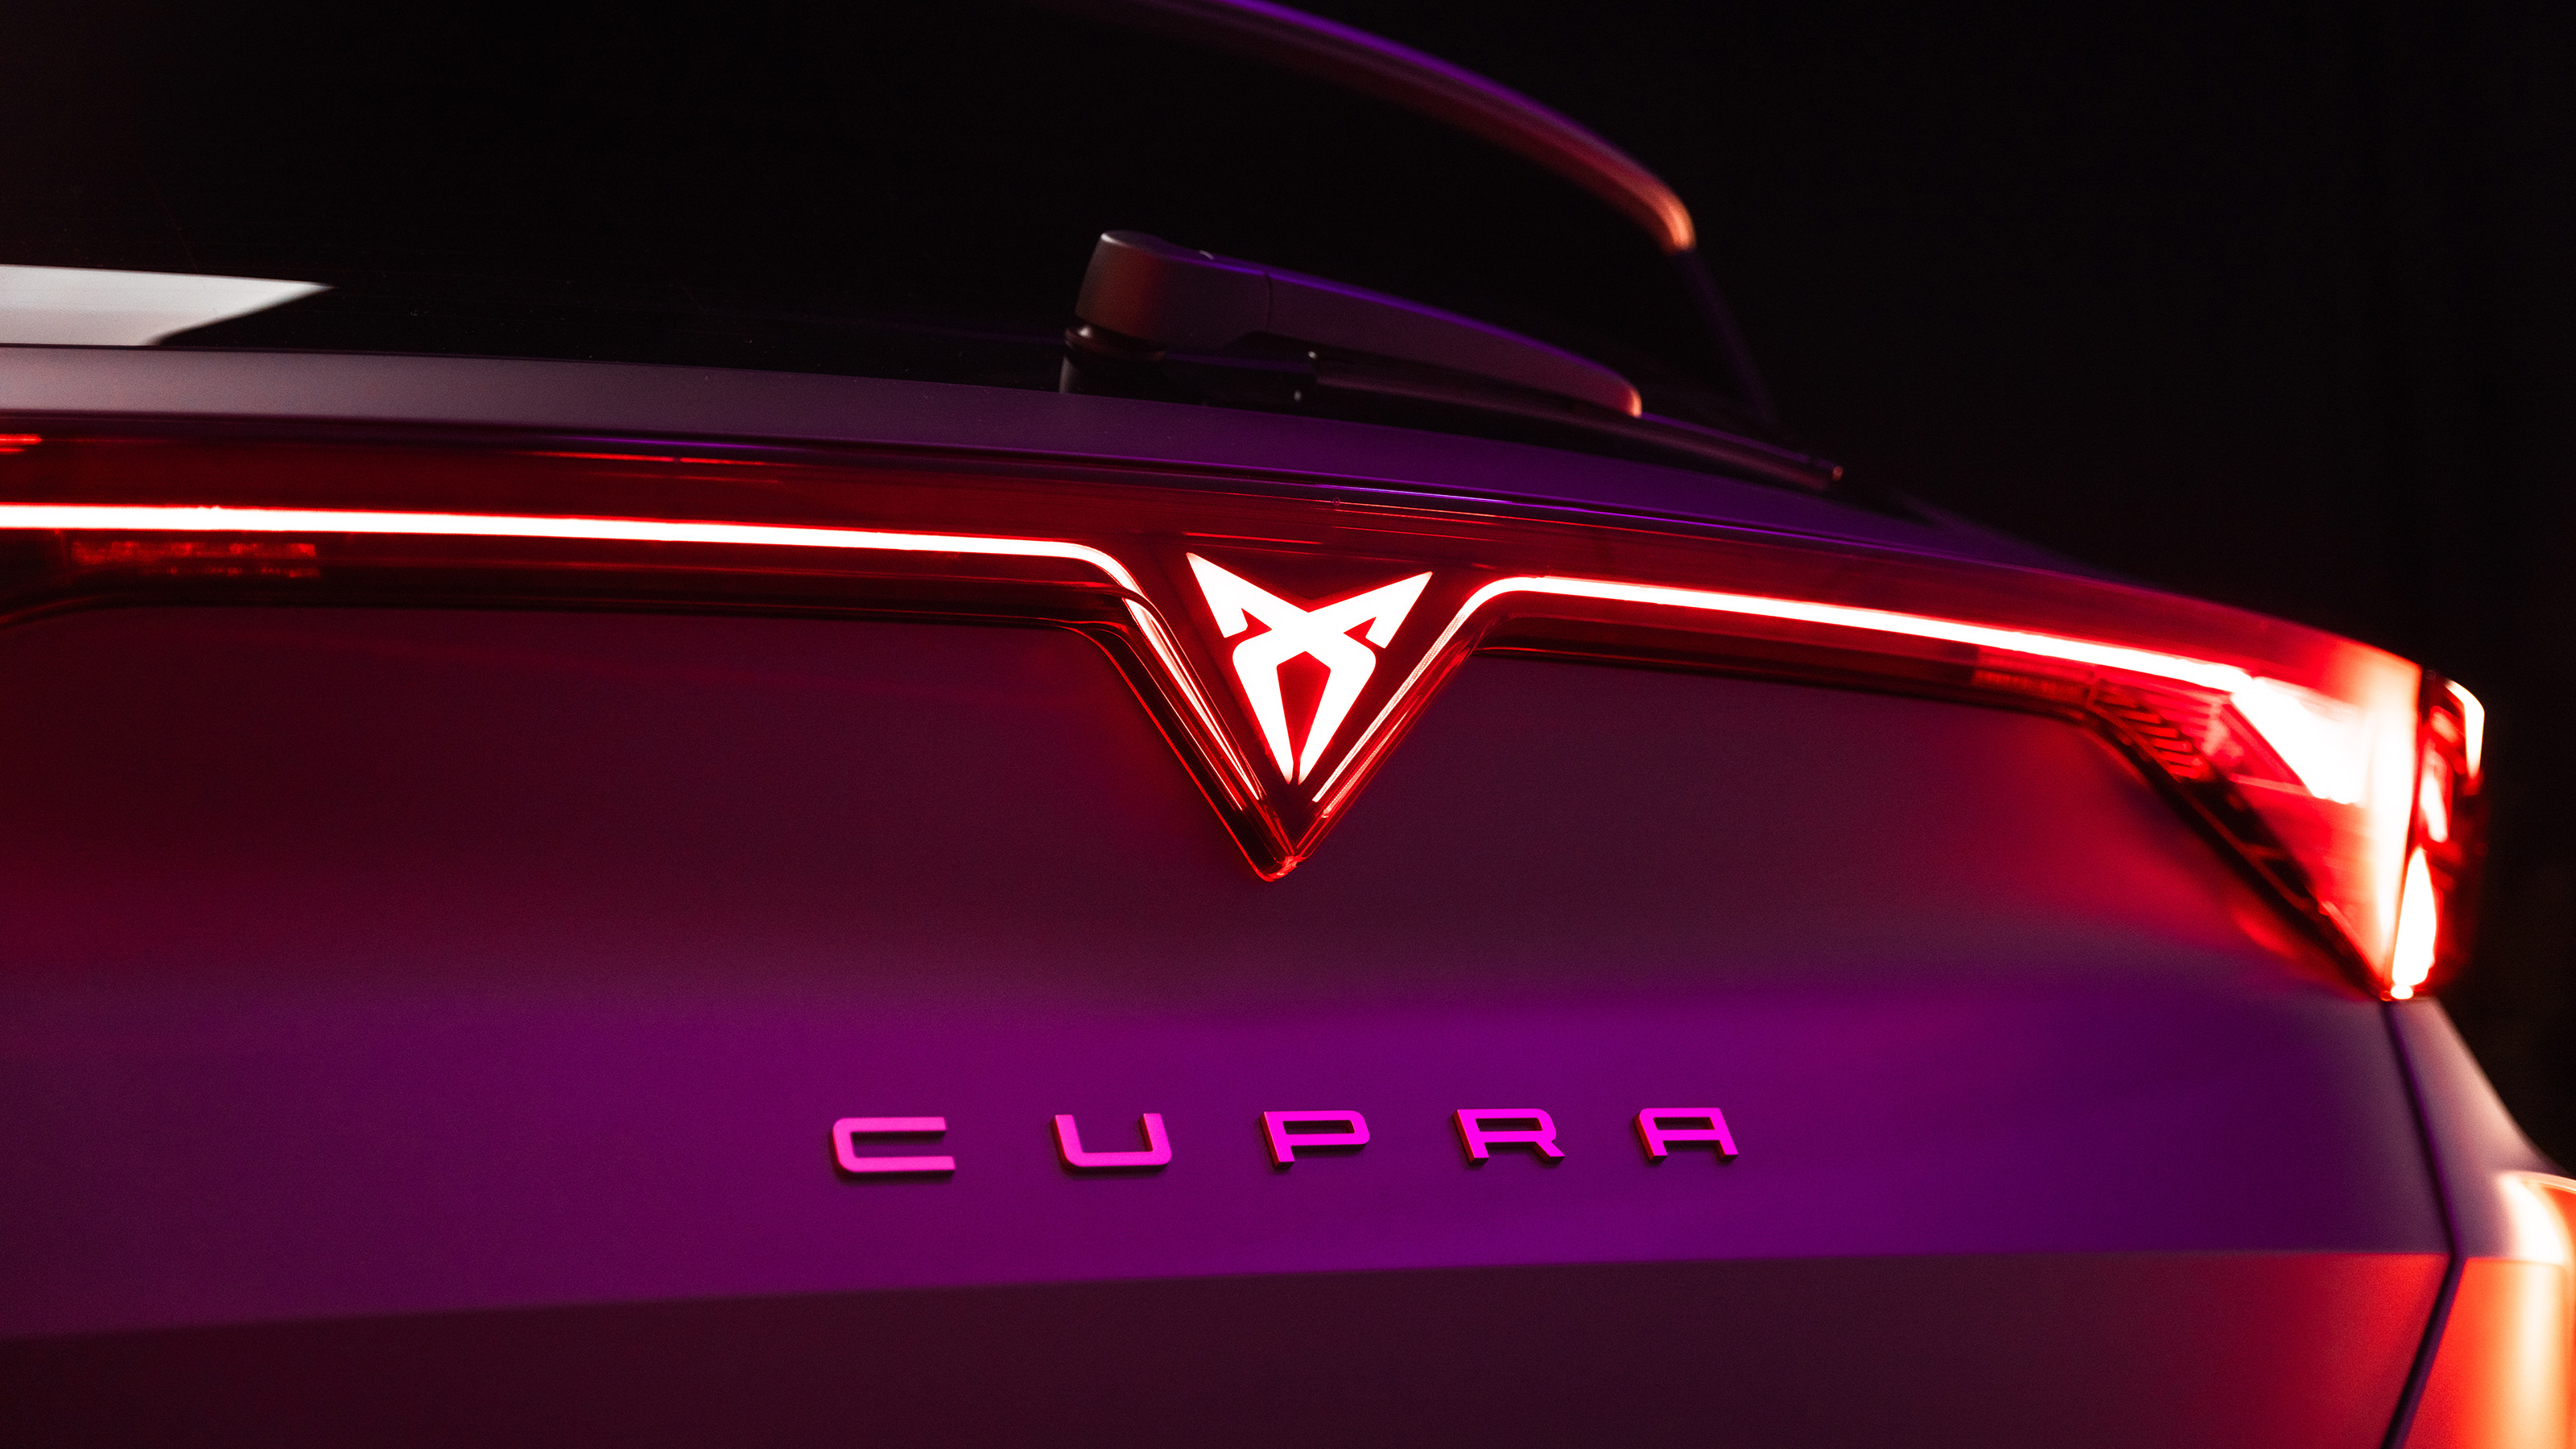 android, well, the refreshed cupra formentor certainly isn’t messing around